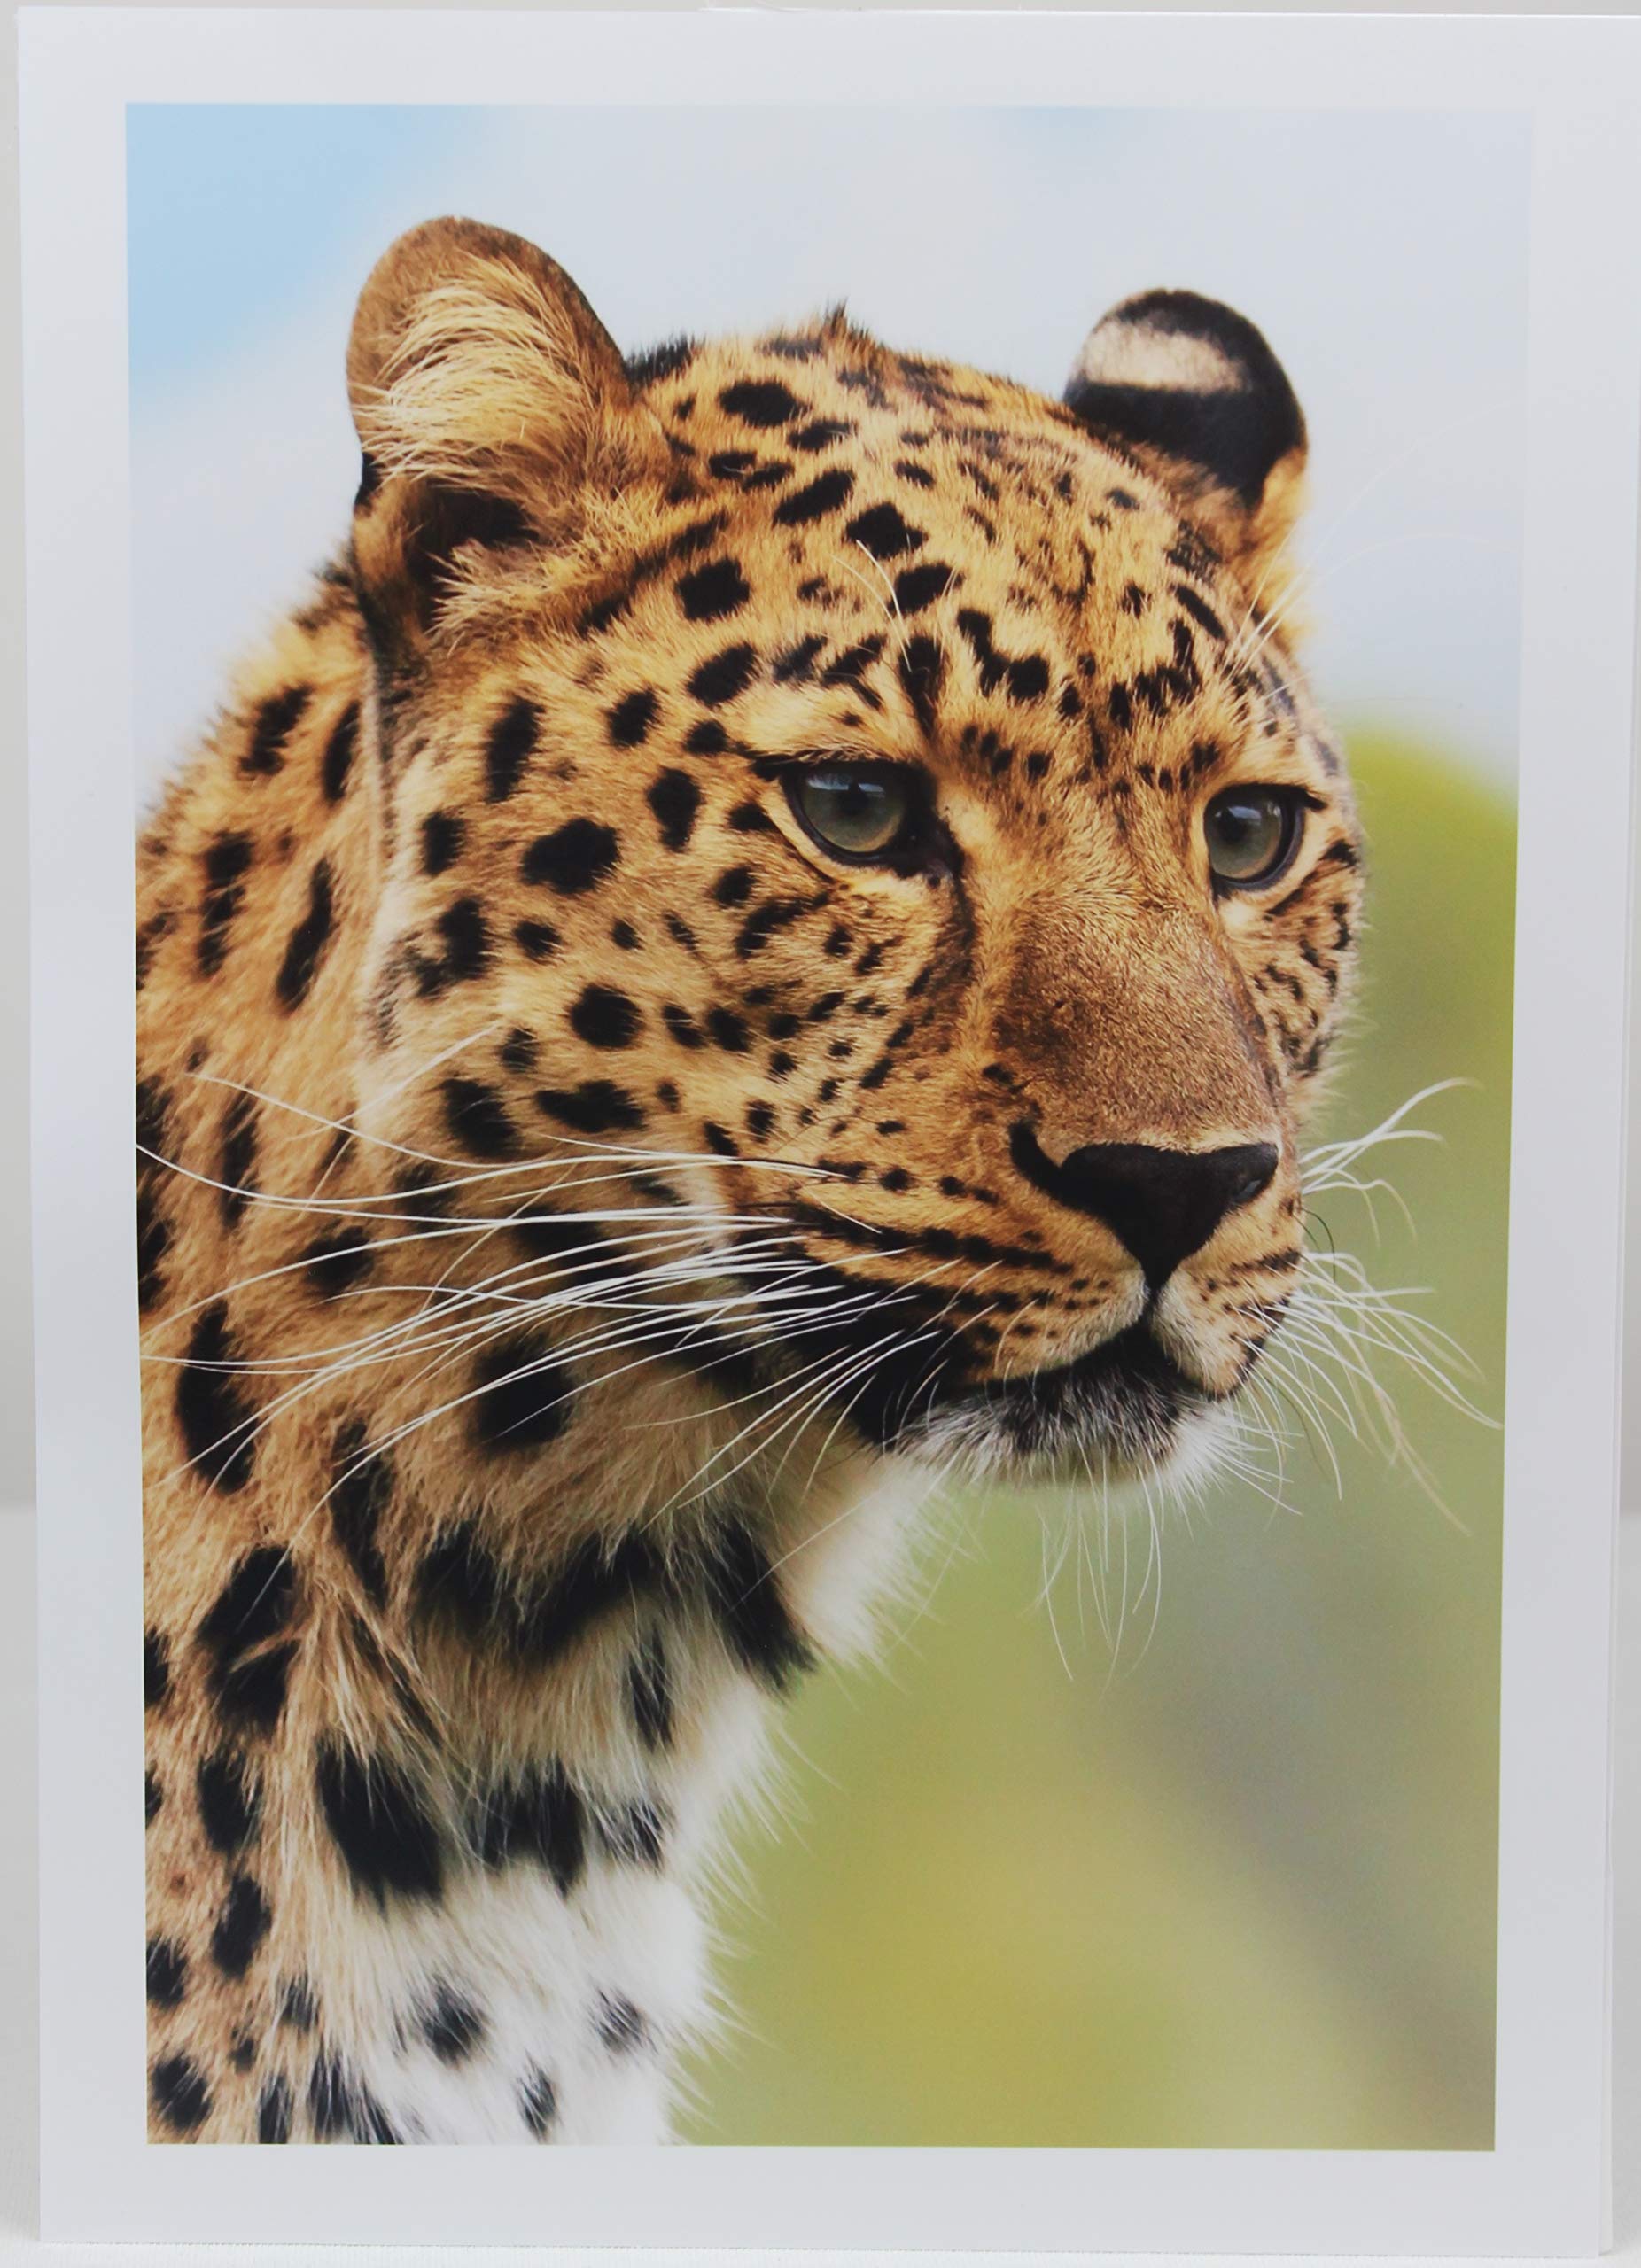 PPD Inkjet Gloss Super Premium Photo Paper 6 x 4 Inch 280gsm x 50 Sheets PPD-20-50